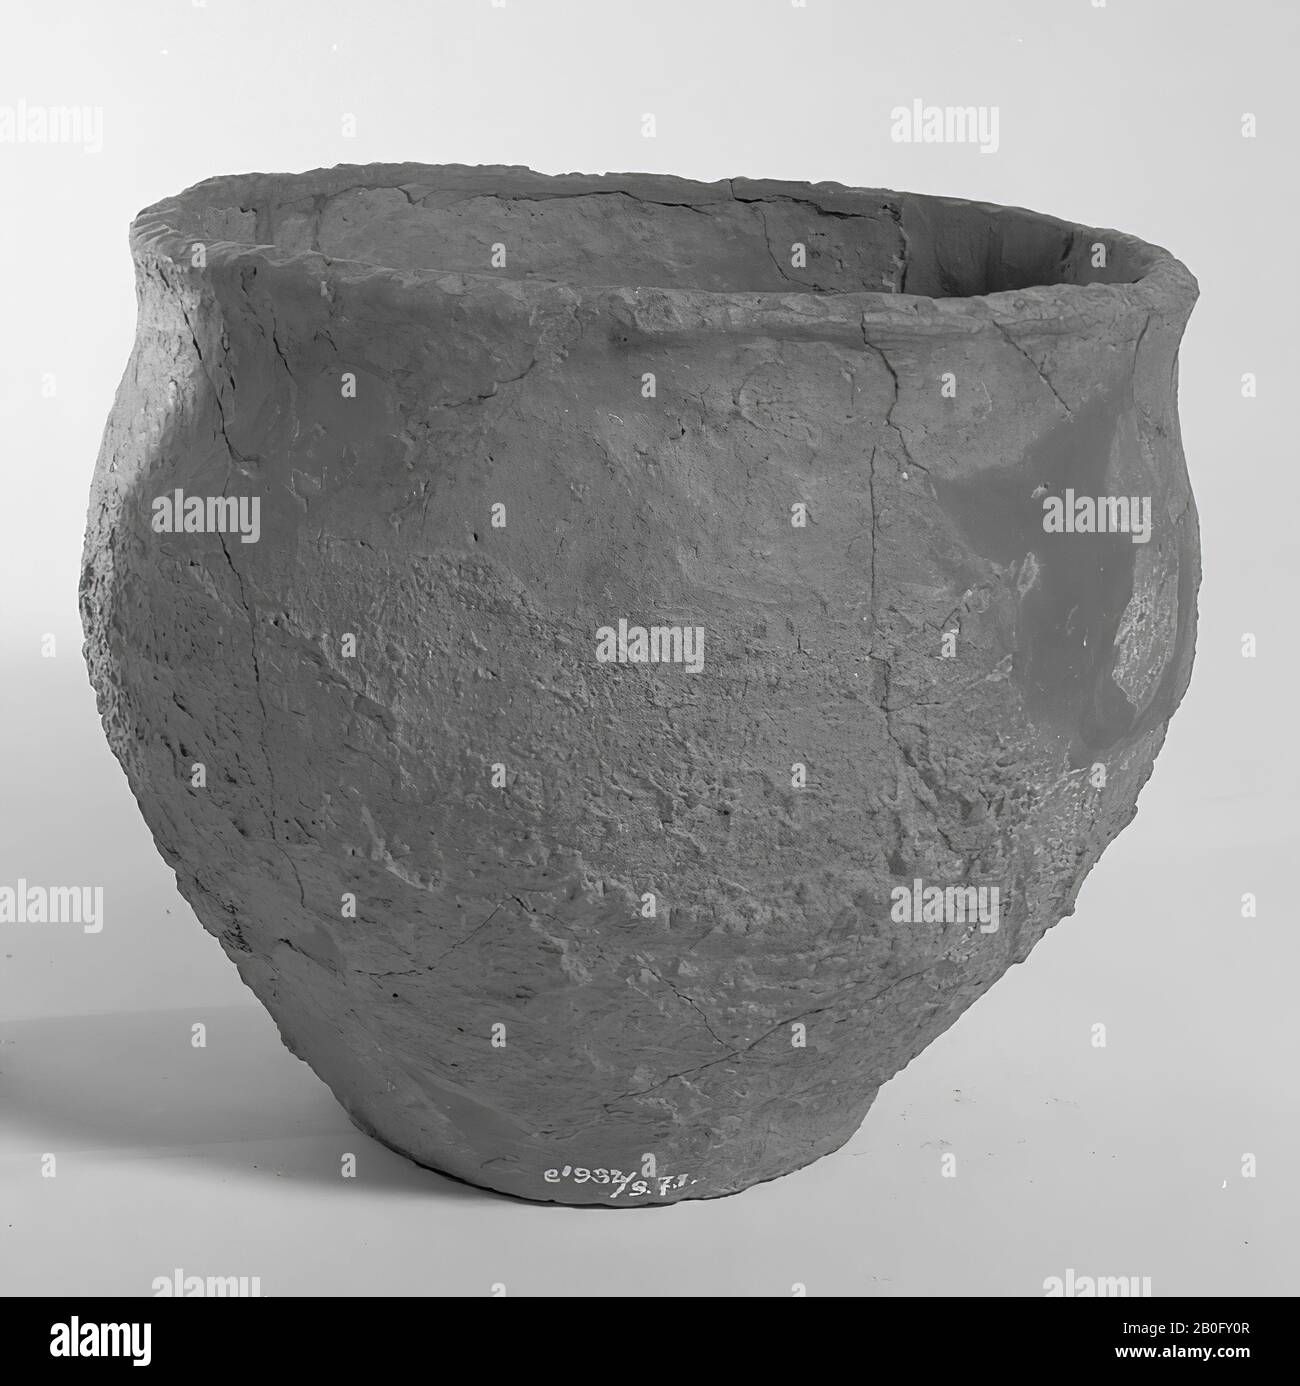 Germanic roundabout of earthenware. Old bondings and additions. Contains cremated residues, urn, earthenware, h: 14.5 cm, diam: 16.5 cm, prehistory -1200 Stock Photo